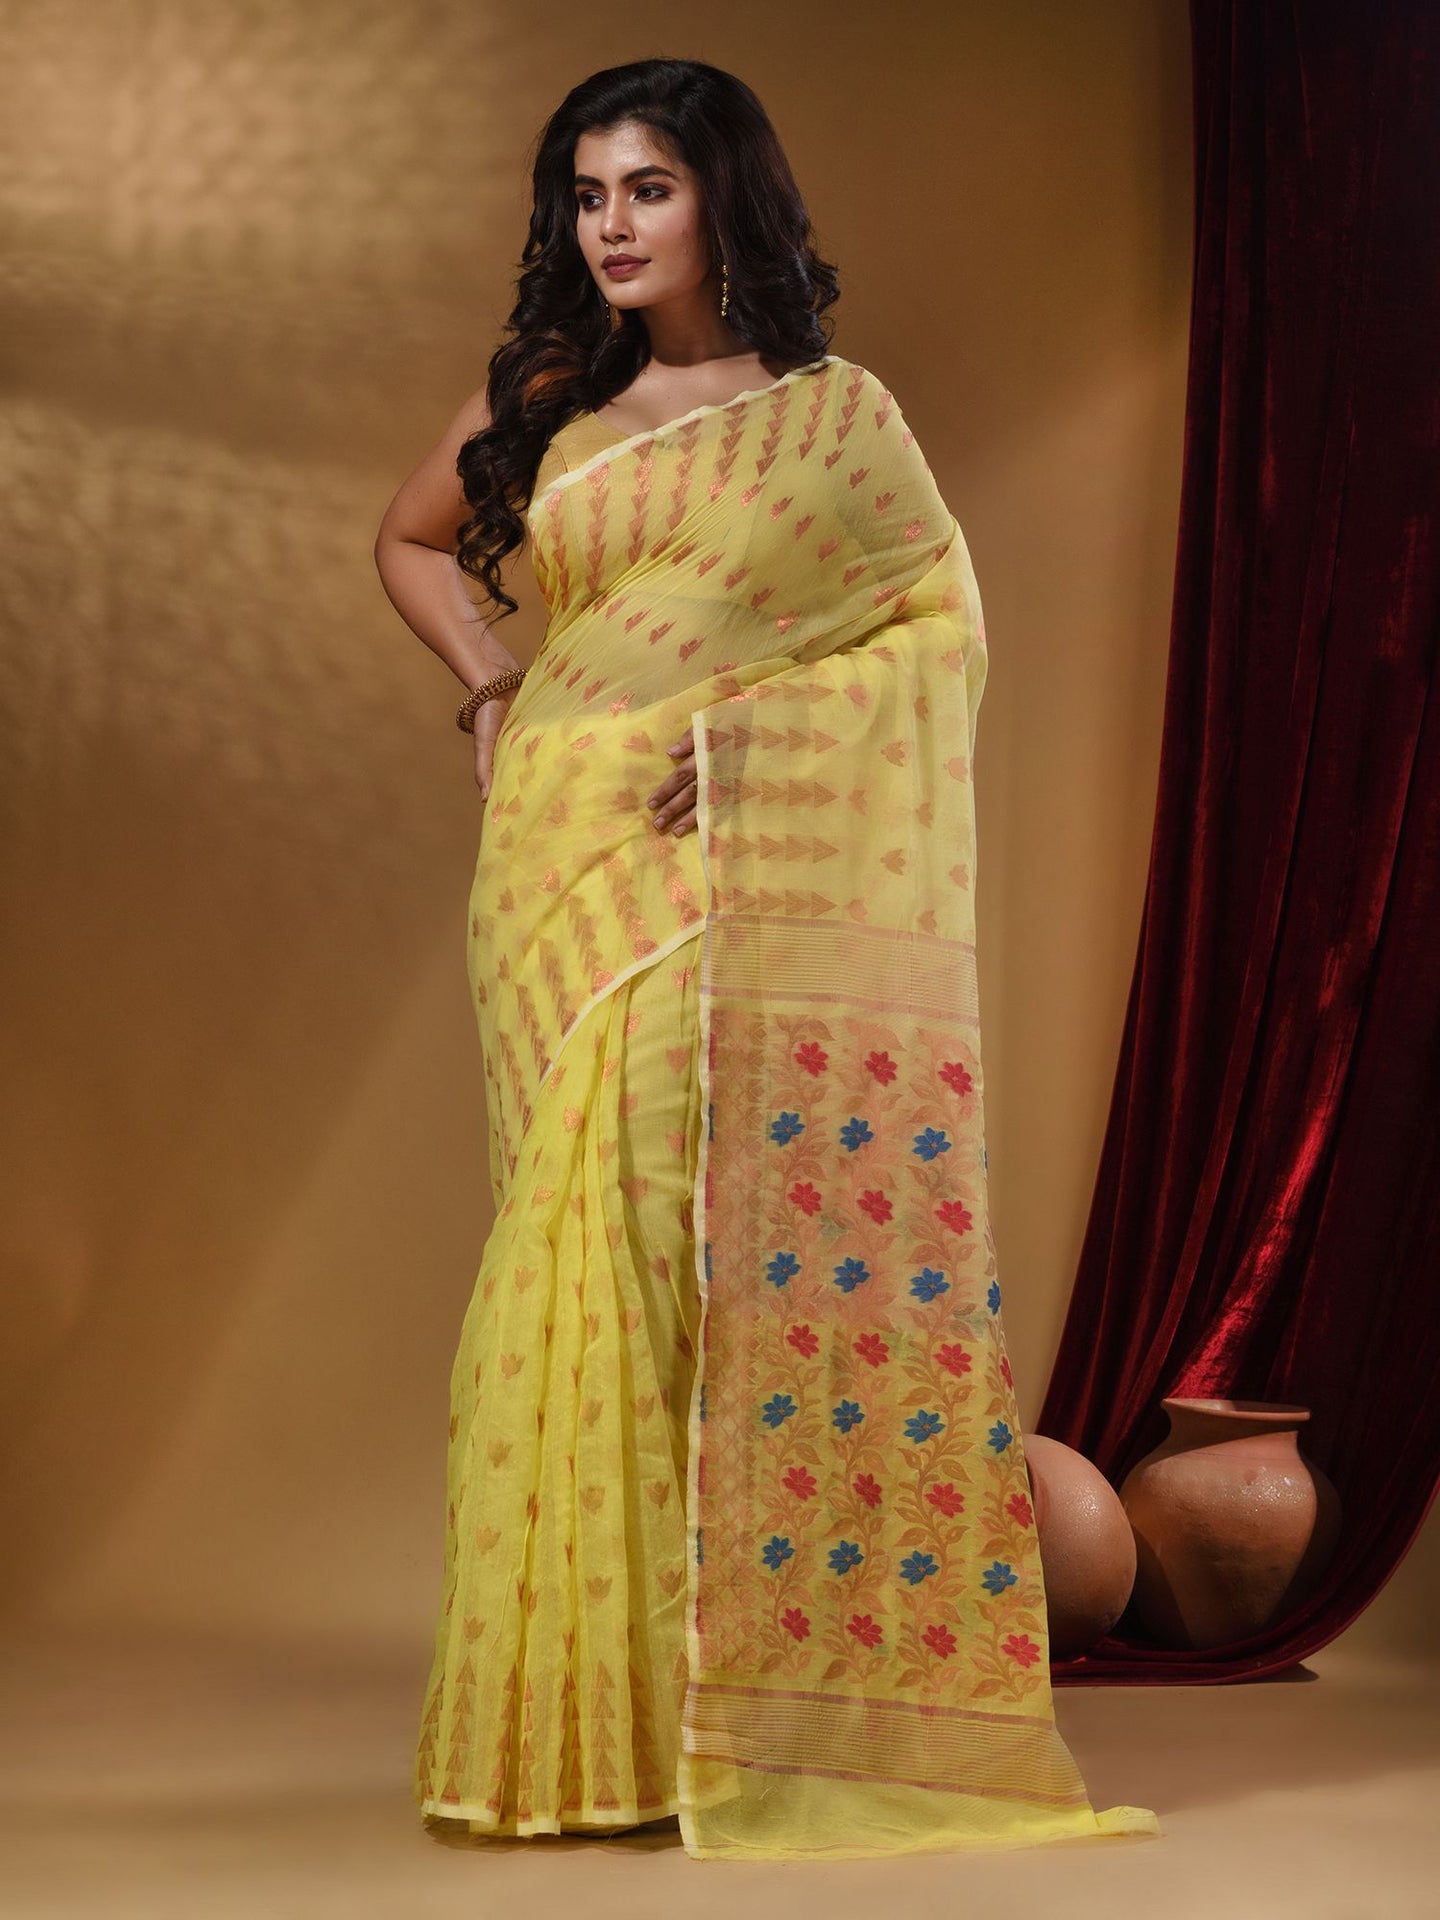 Yellow Cotton Handwoven Jamdani Saree With Geometric Designs and Floral Patterns